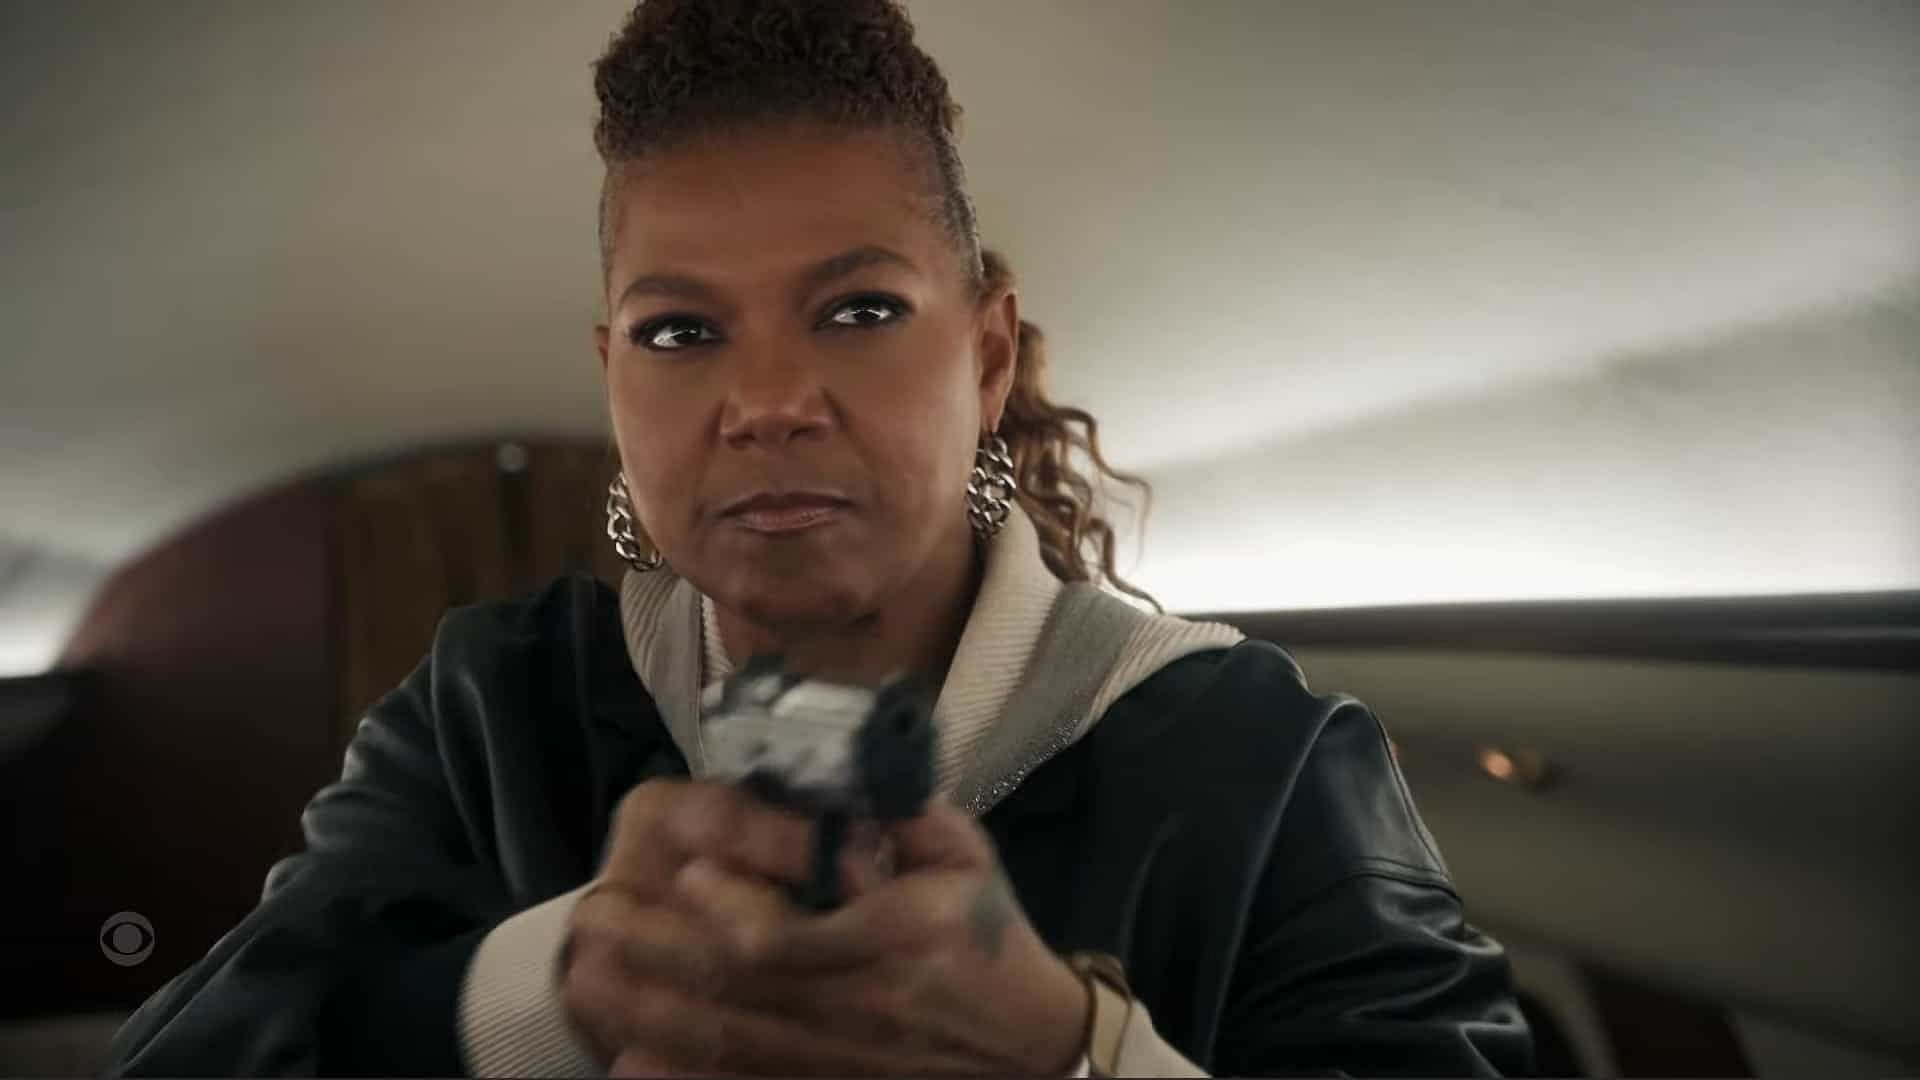 Queen Latifah as Robyn McCall in The Equalizer (Image via CBS)